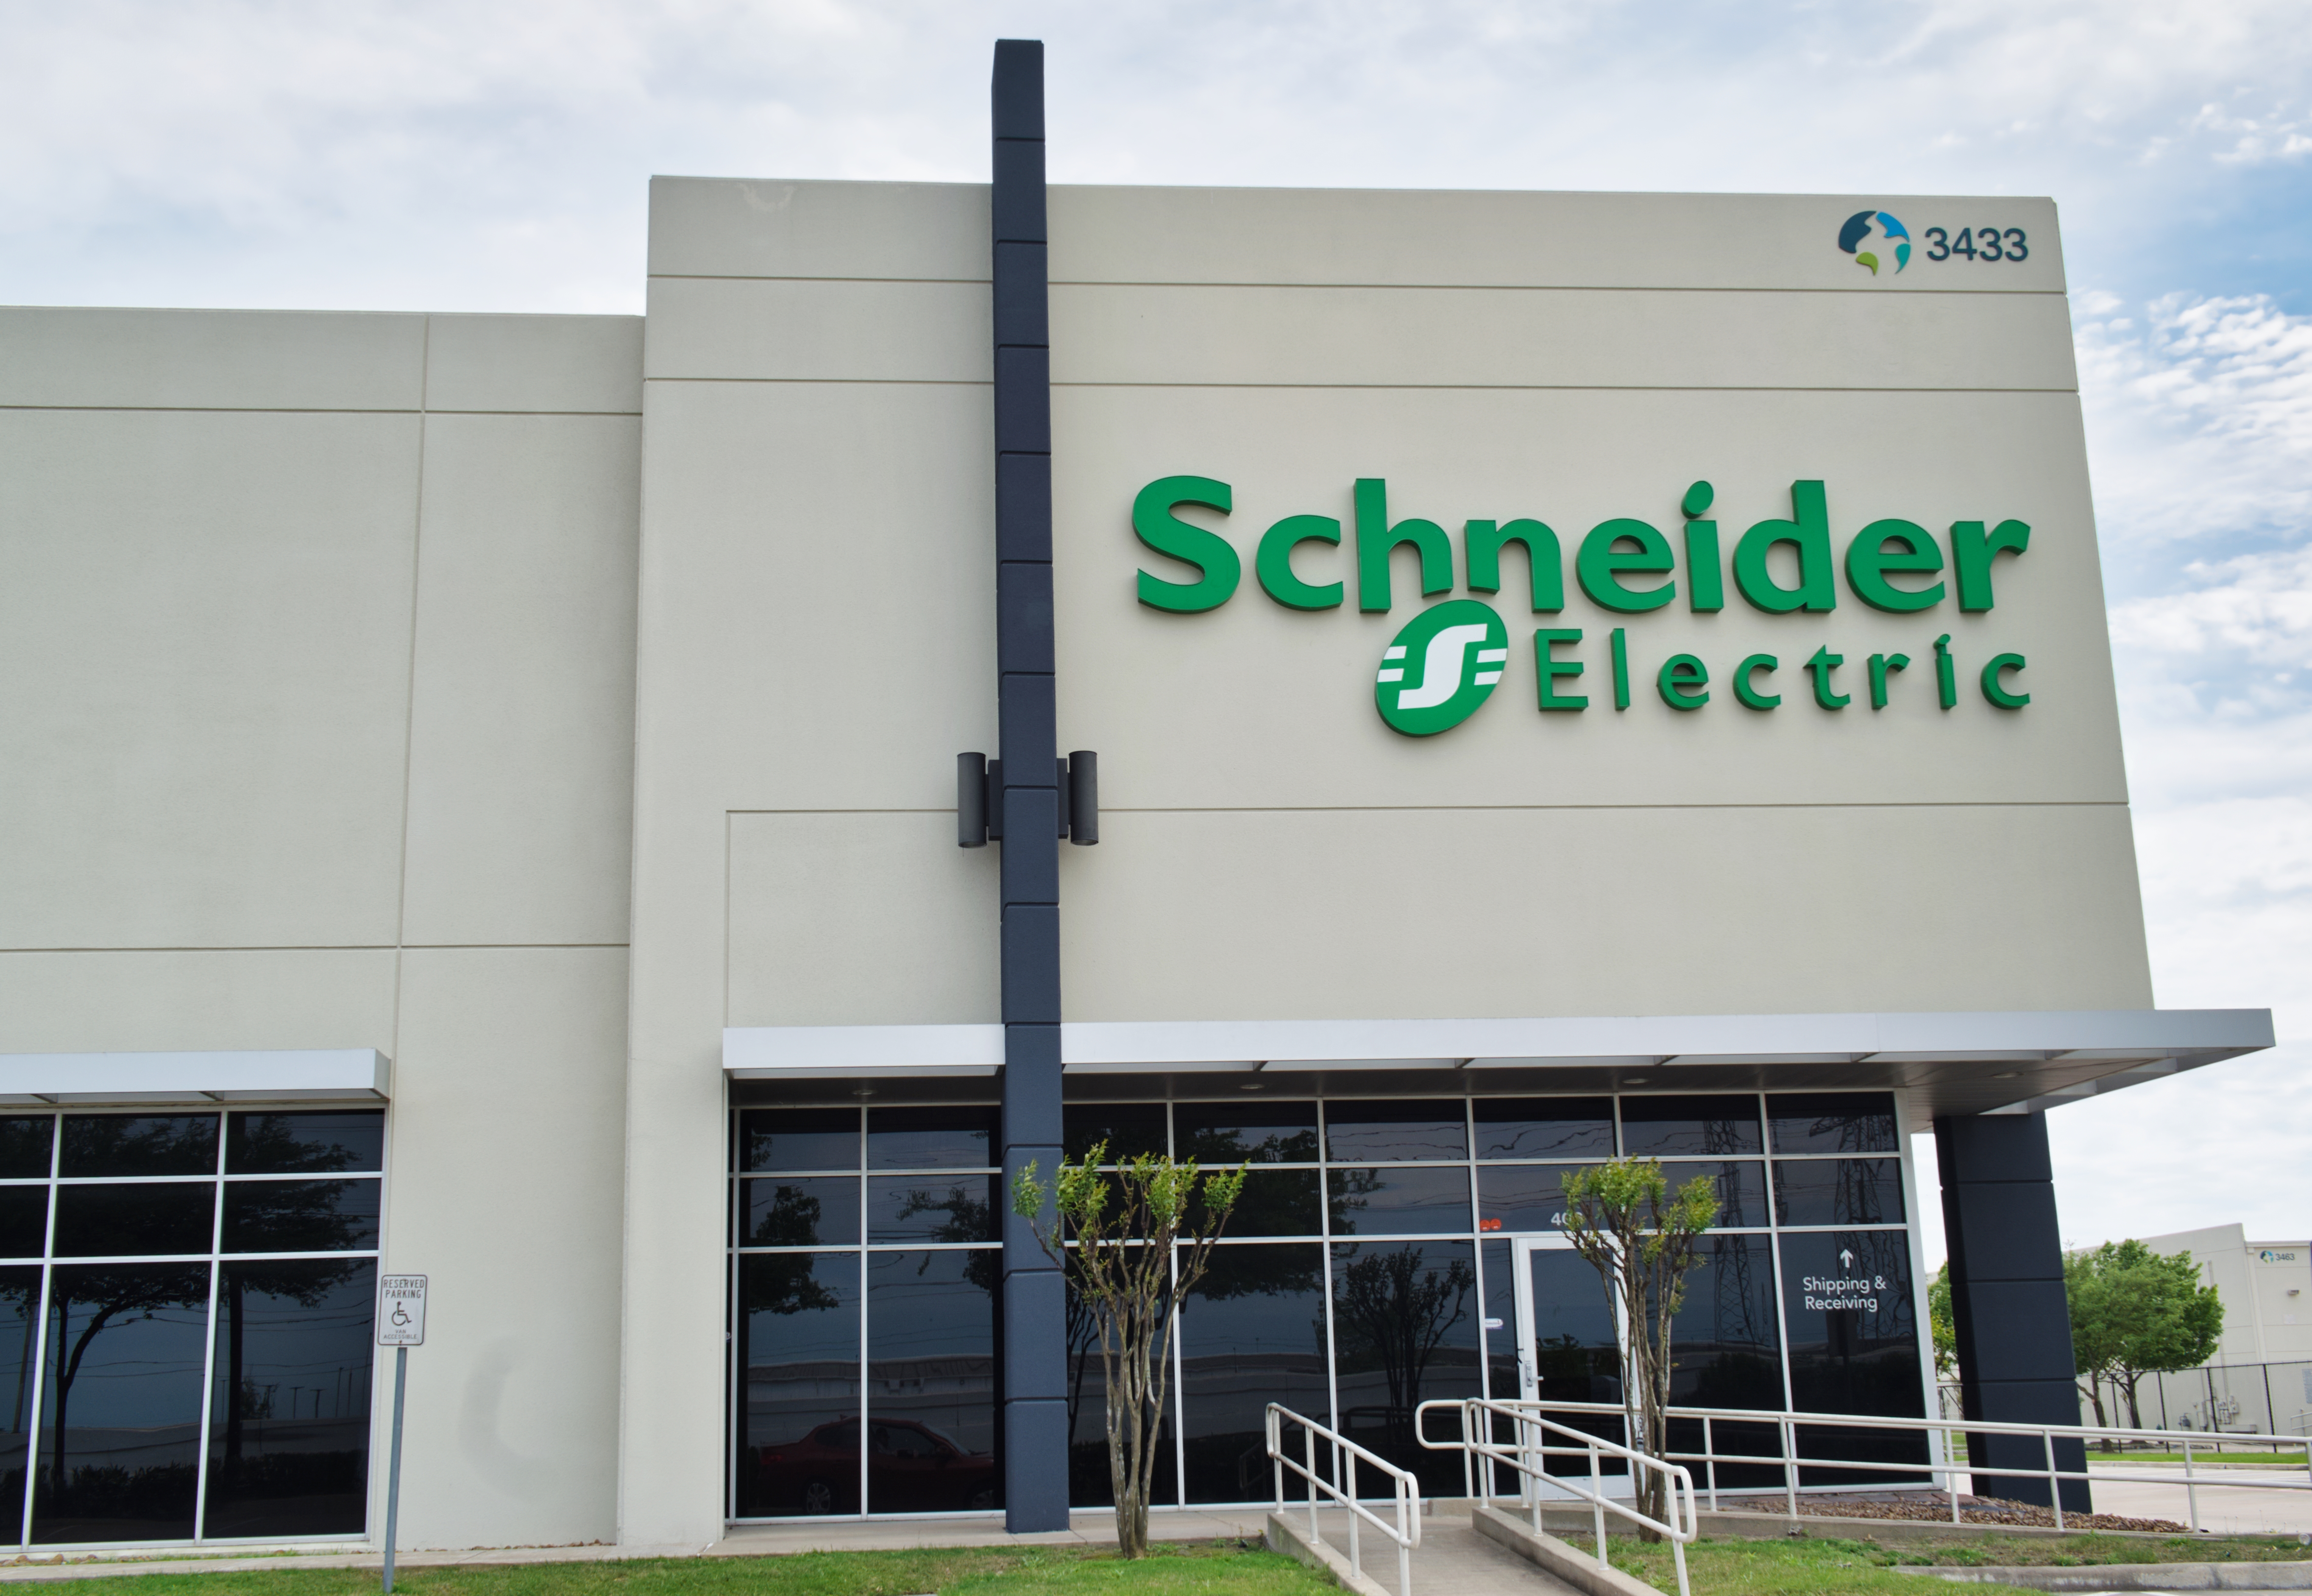 Schneider Electric: An Excellent, Global Energy Solutions Company